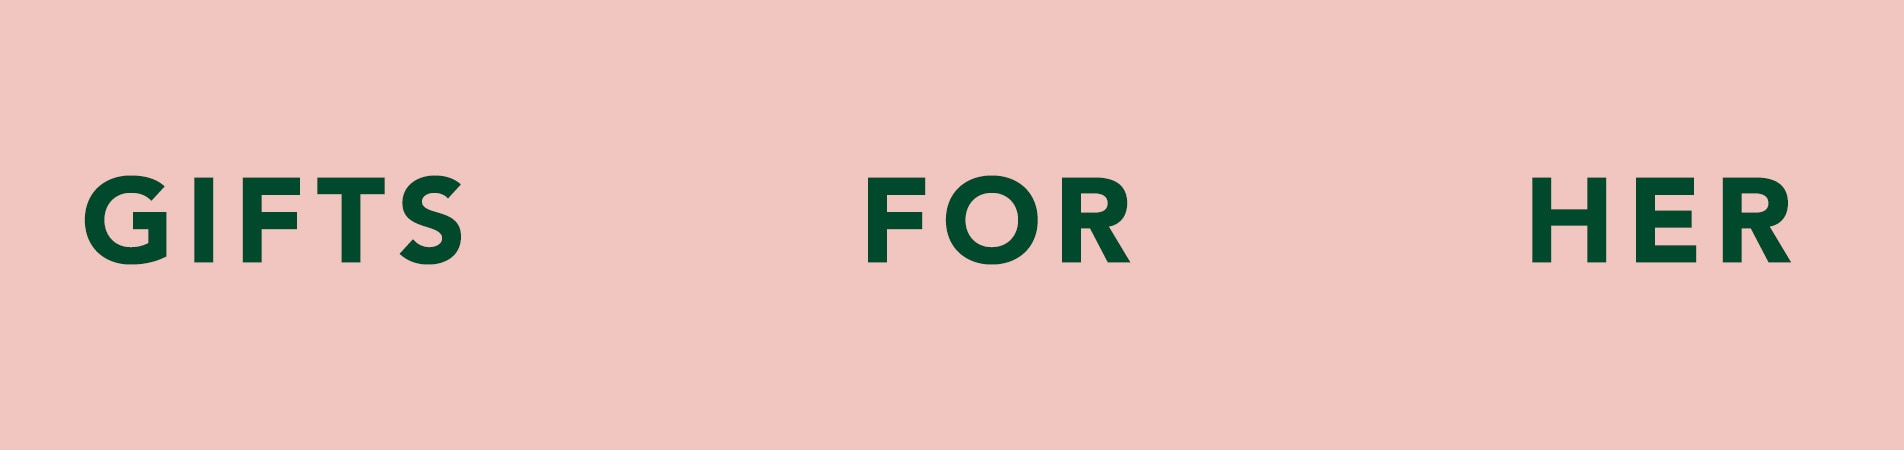 banner. pink background with green font, which says 'gifts for her'